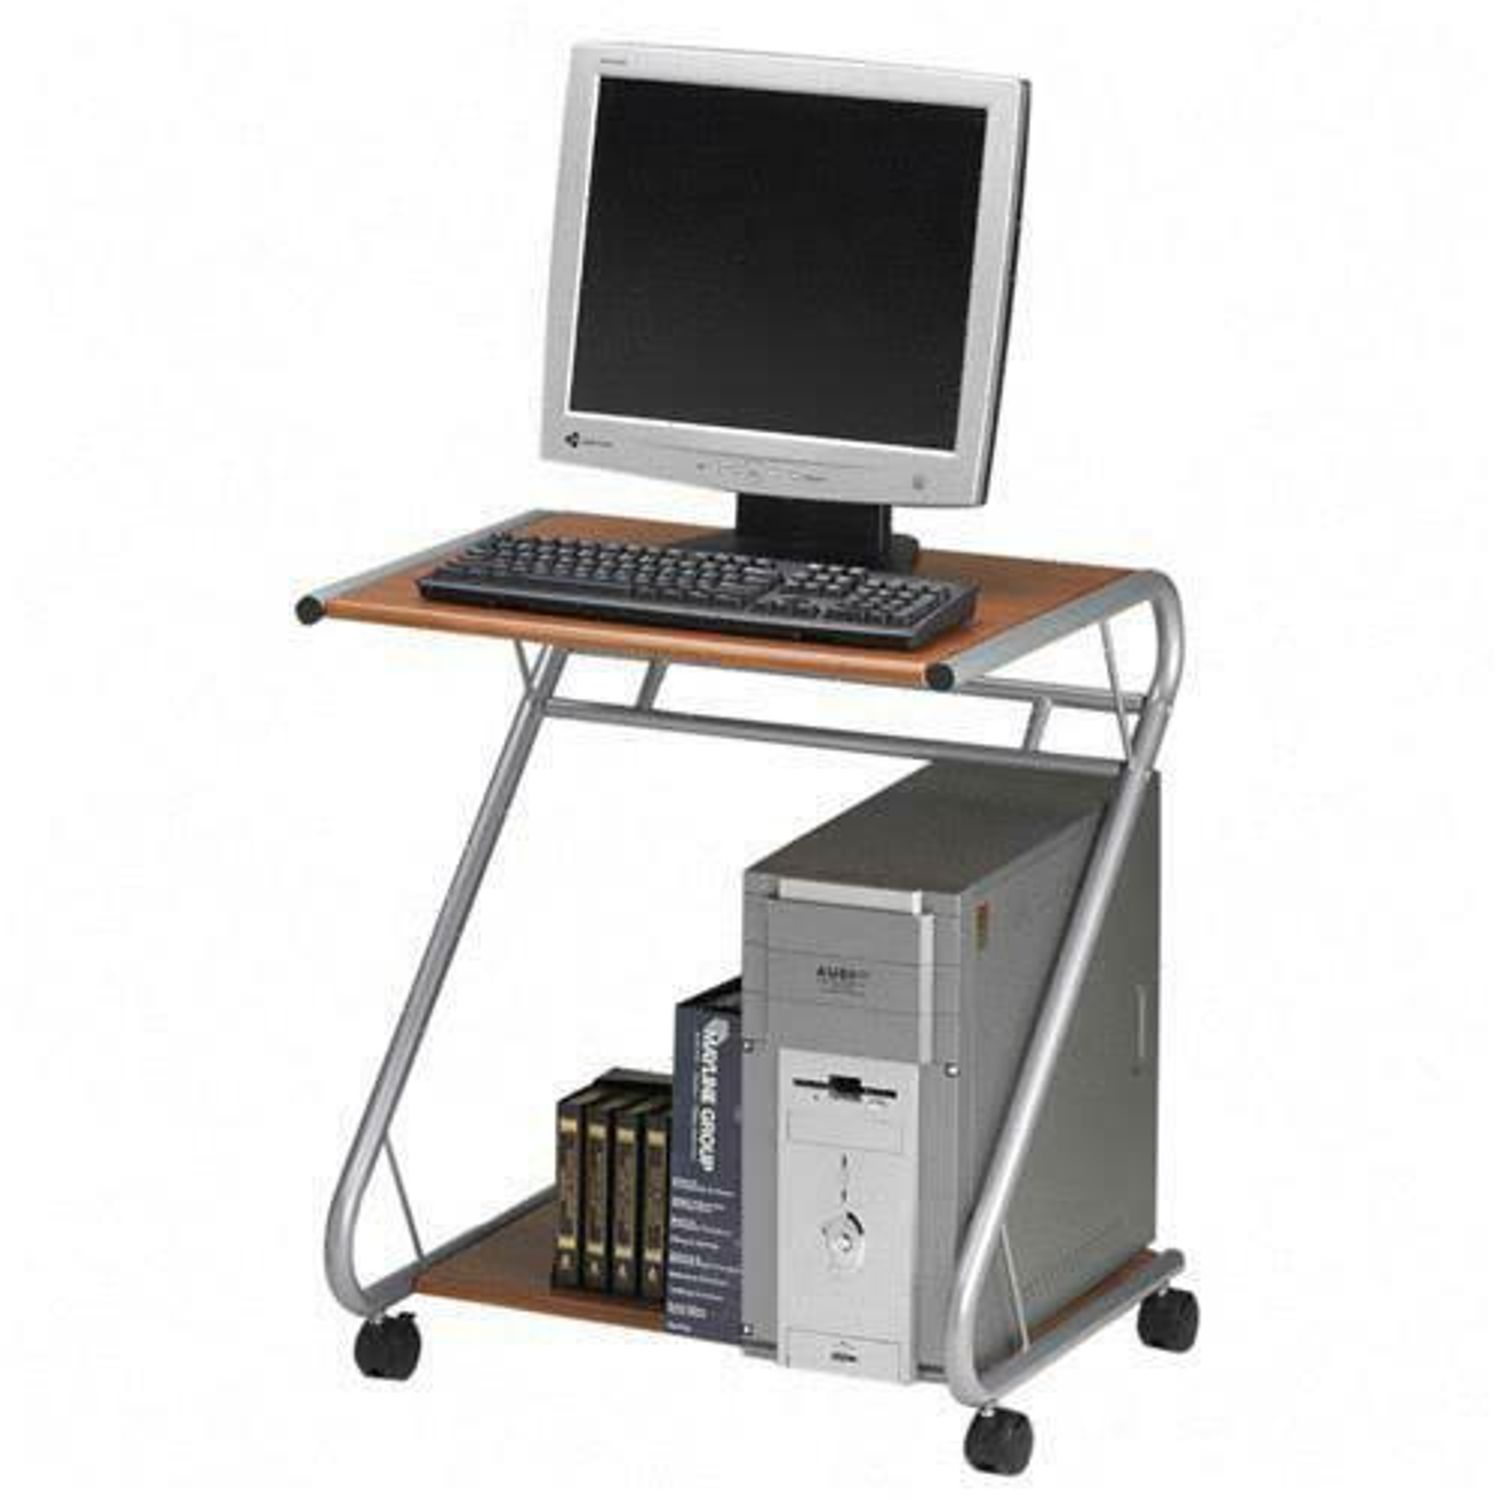 Workstation 28.50" Height x 23.50" Width x 23.50" Depth, Assembly Required, Medium Cherry